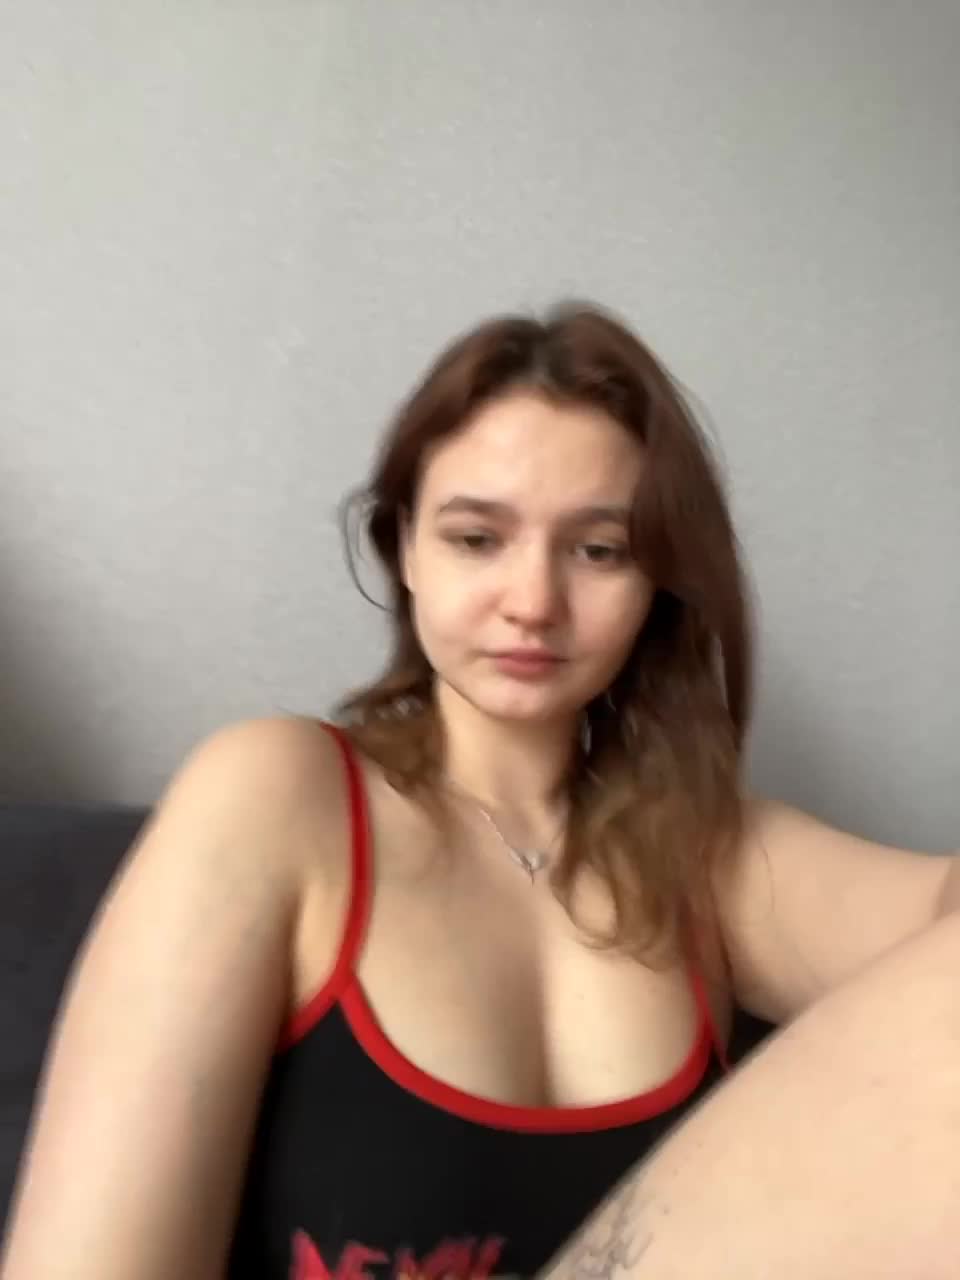 View or download file sablecat on 2023-02-21 from bongacams